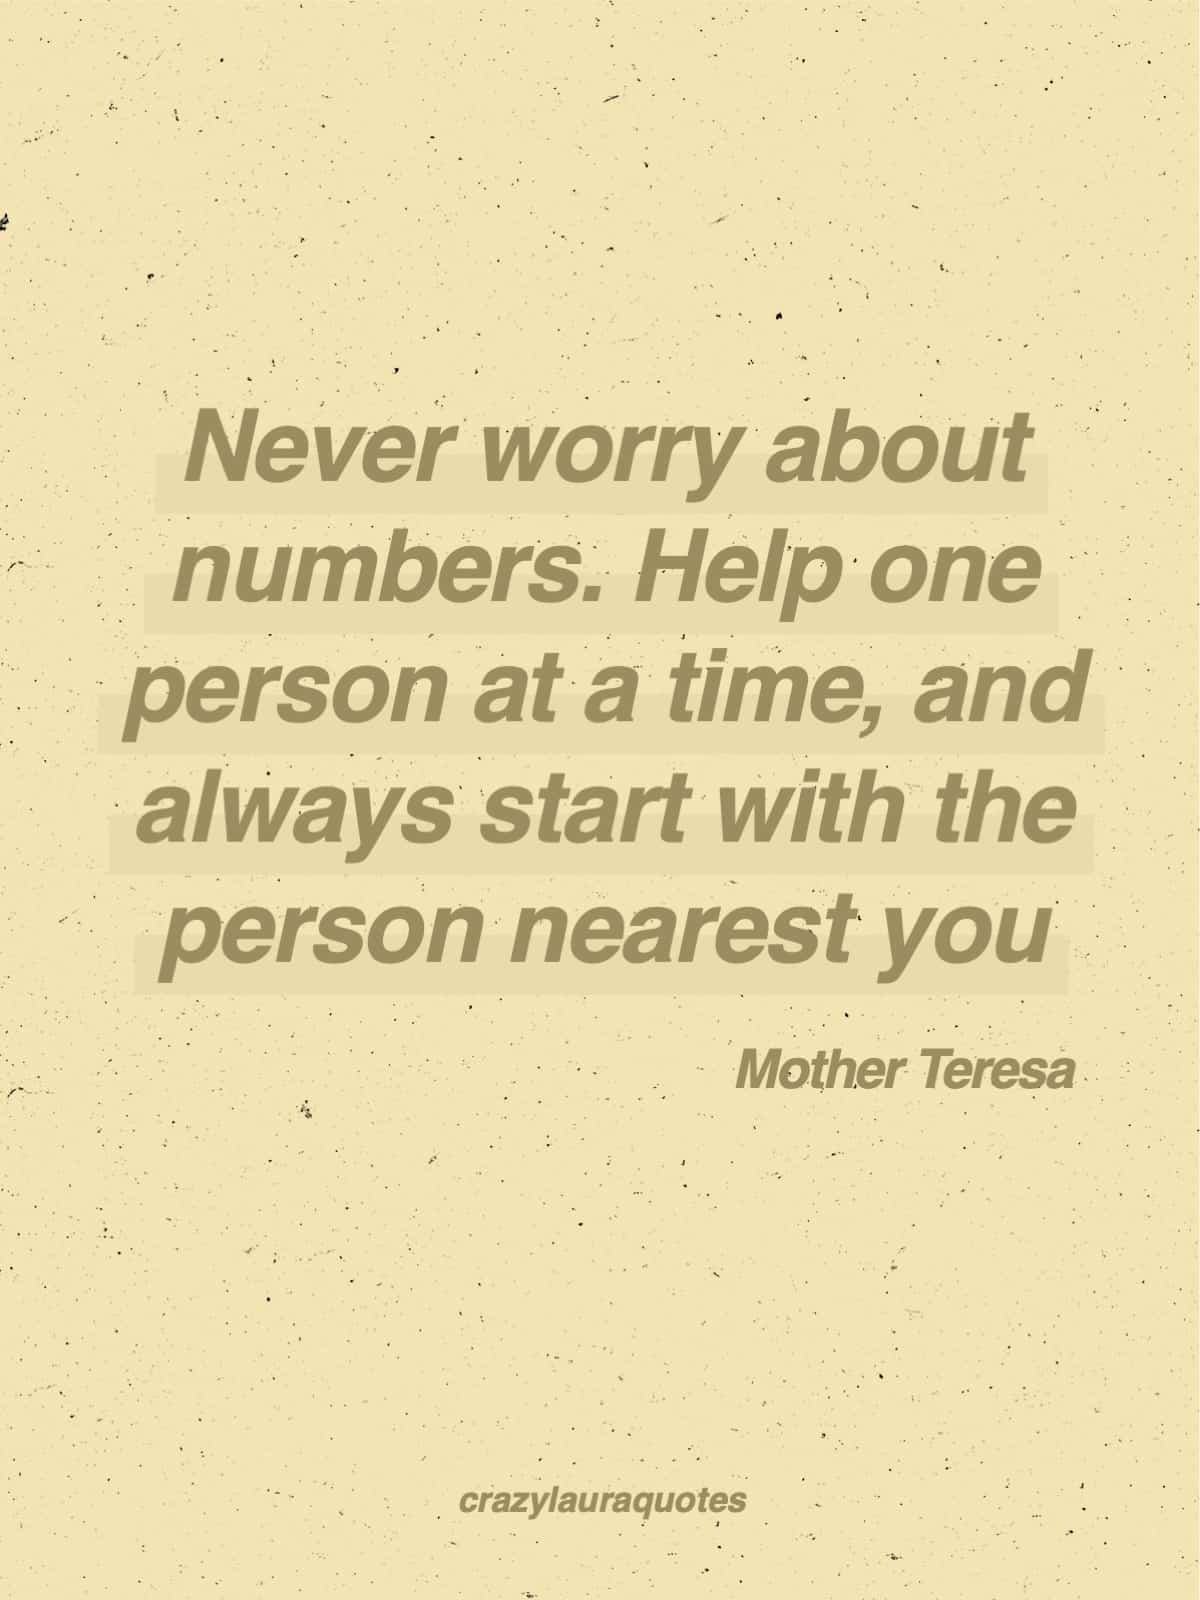 help those closest to you first mother teresa